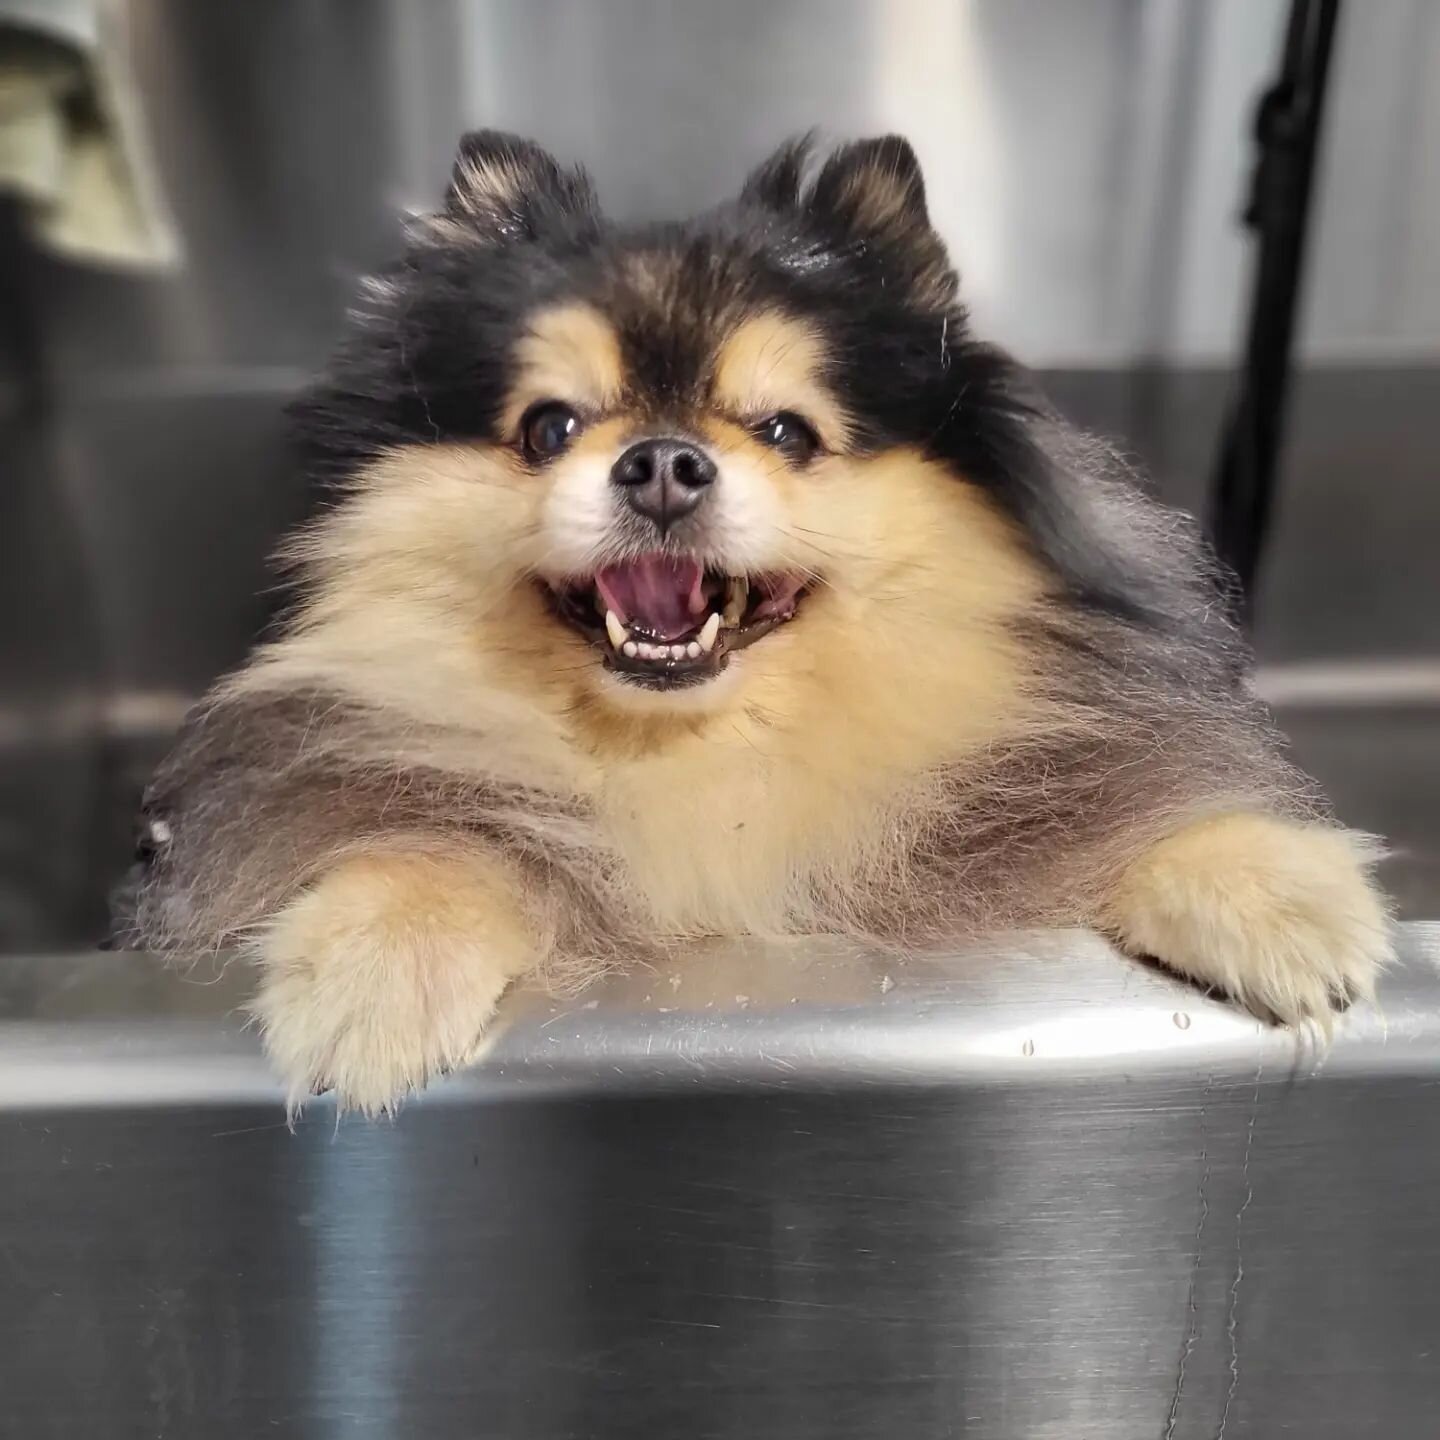 Koda is tooo cute not to post a million pictures of. L😍😍k at that before and after!
.
.
#doggroomer #grooming #dogsofinstagram #pomeranian #pomeraniansofinstagram #mobilegrooming #groomer